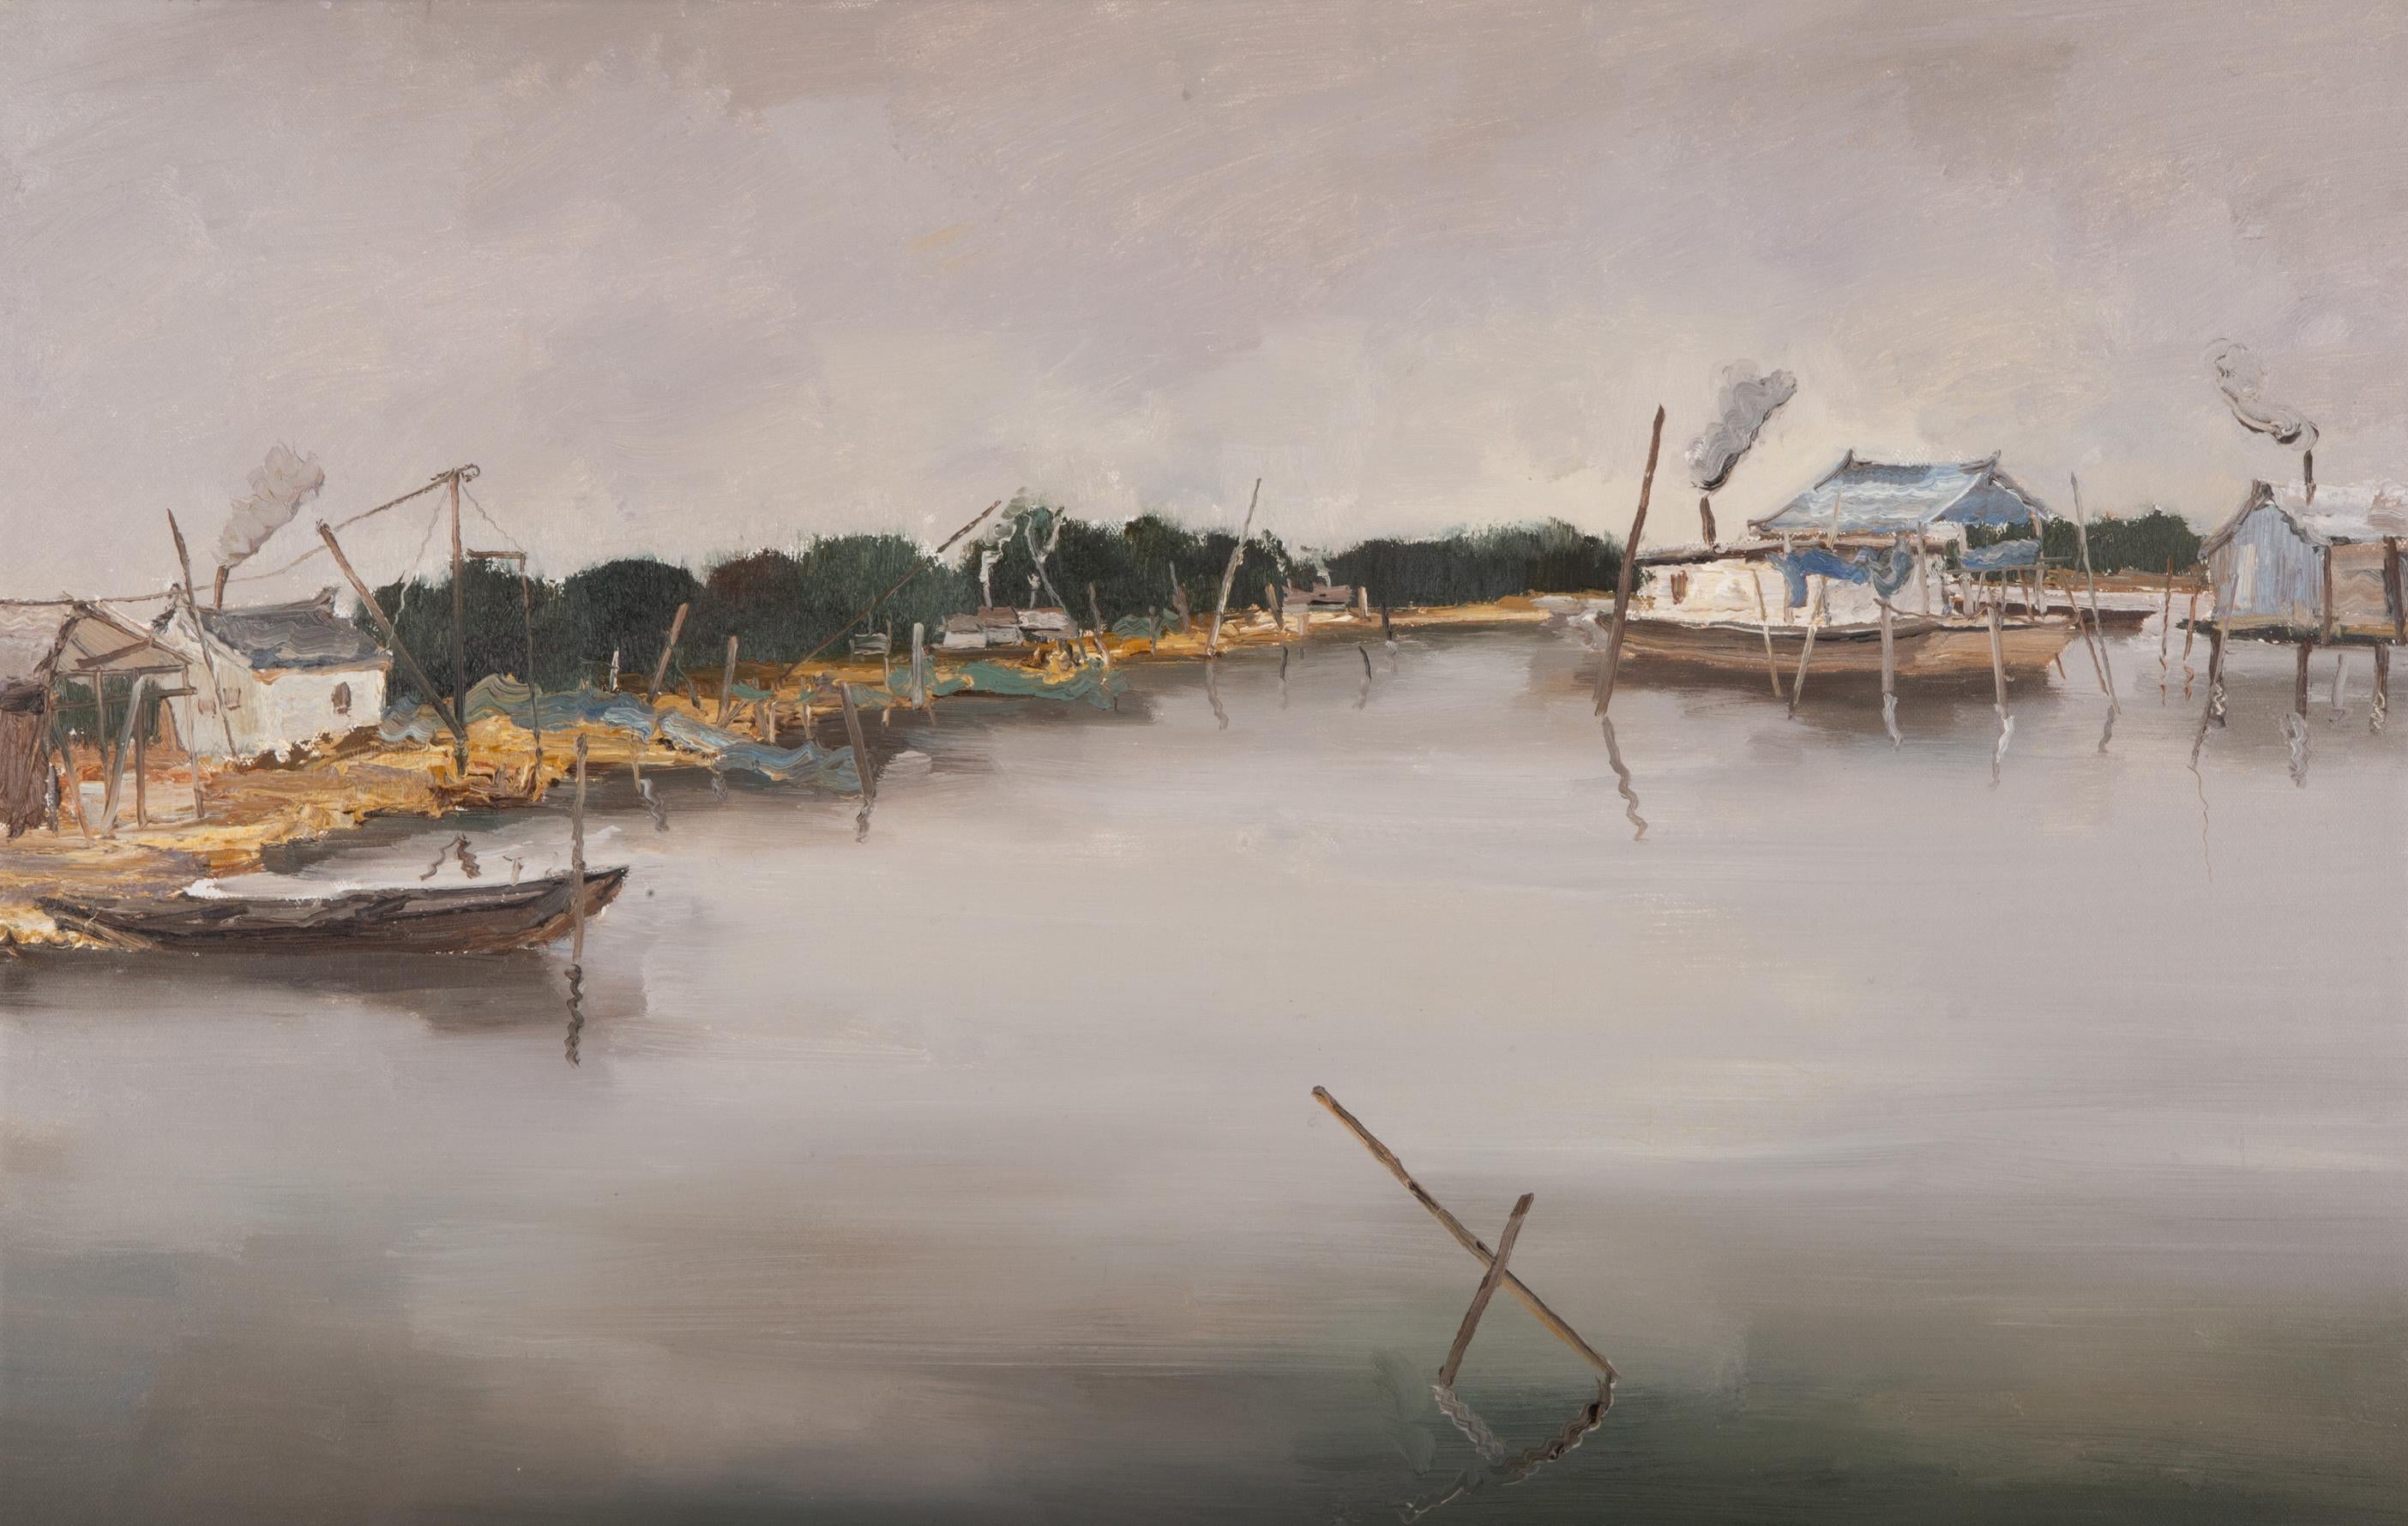 Title: Lake View
Medium: Oil on canvas
Size: 19 x 29.5 inches
Frame: Framing options available!
Condition: The painting appears to be in excellent condition.

Year: 2000 Circa
Artist: HuaYi Wang
Signature: Signed
Signature Location: Bottom